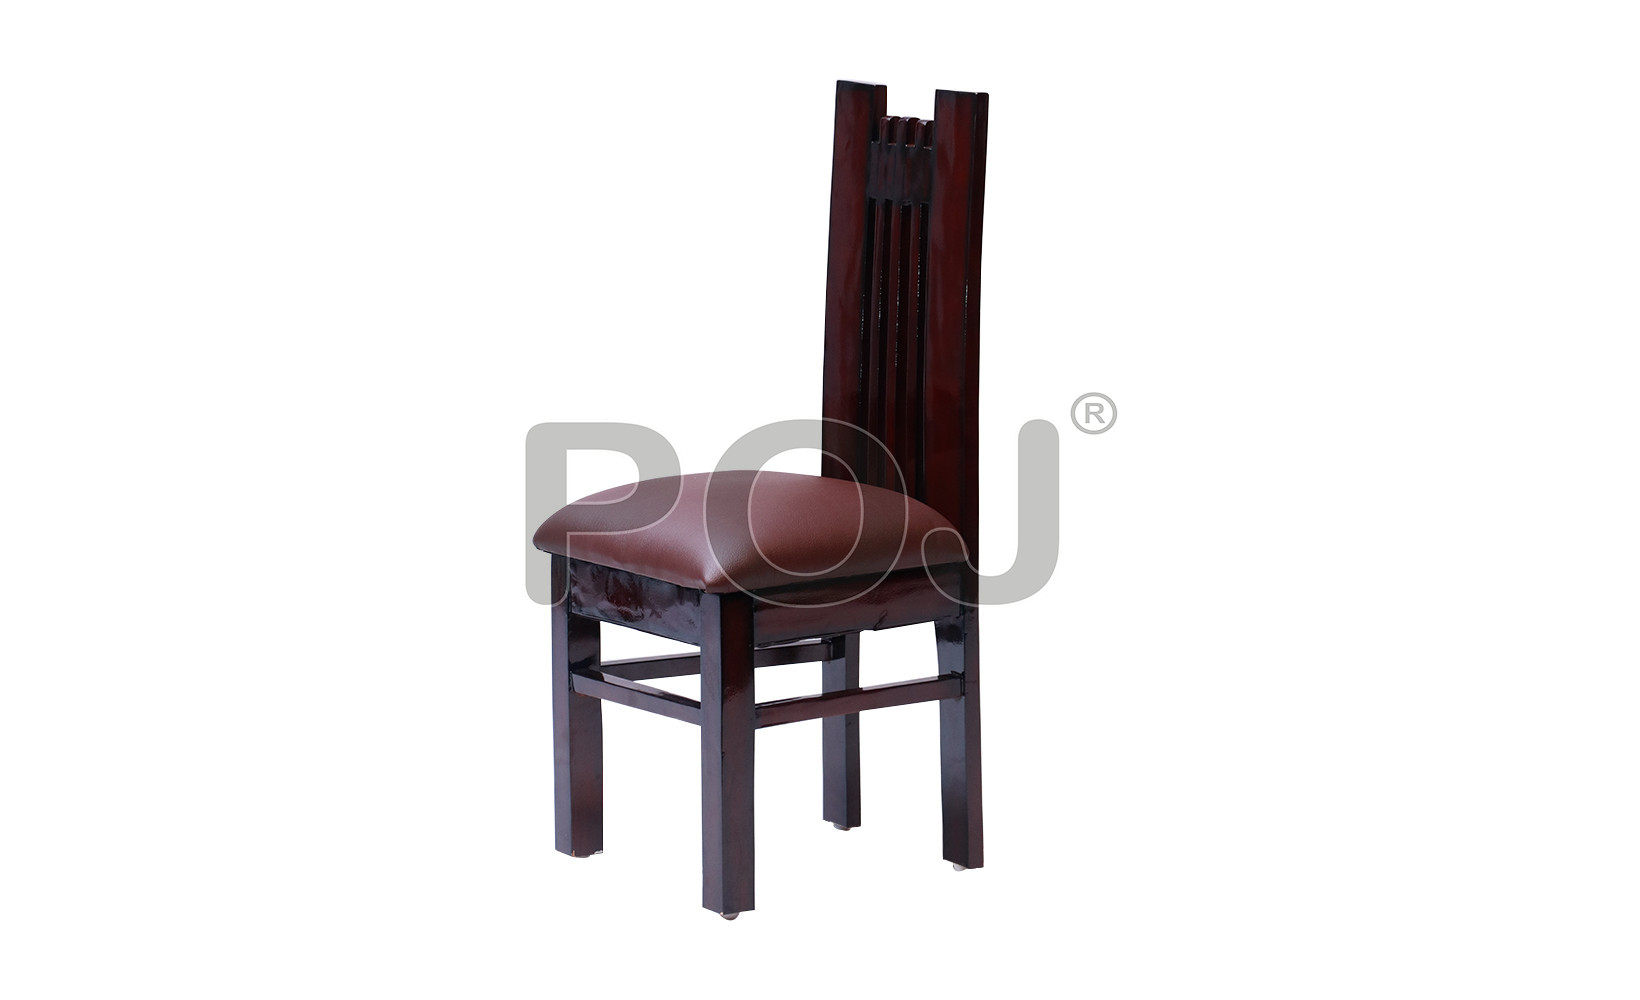 Lola Dining Chair With Leatherette Work On Chair Seat